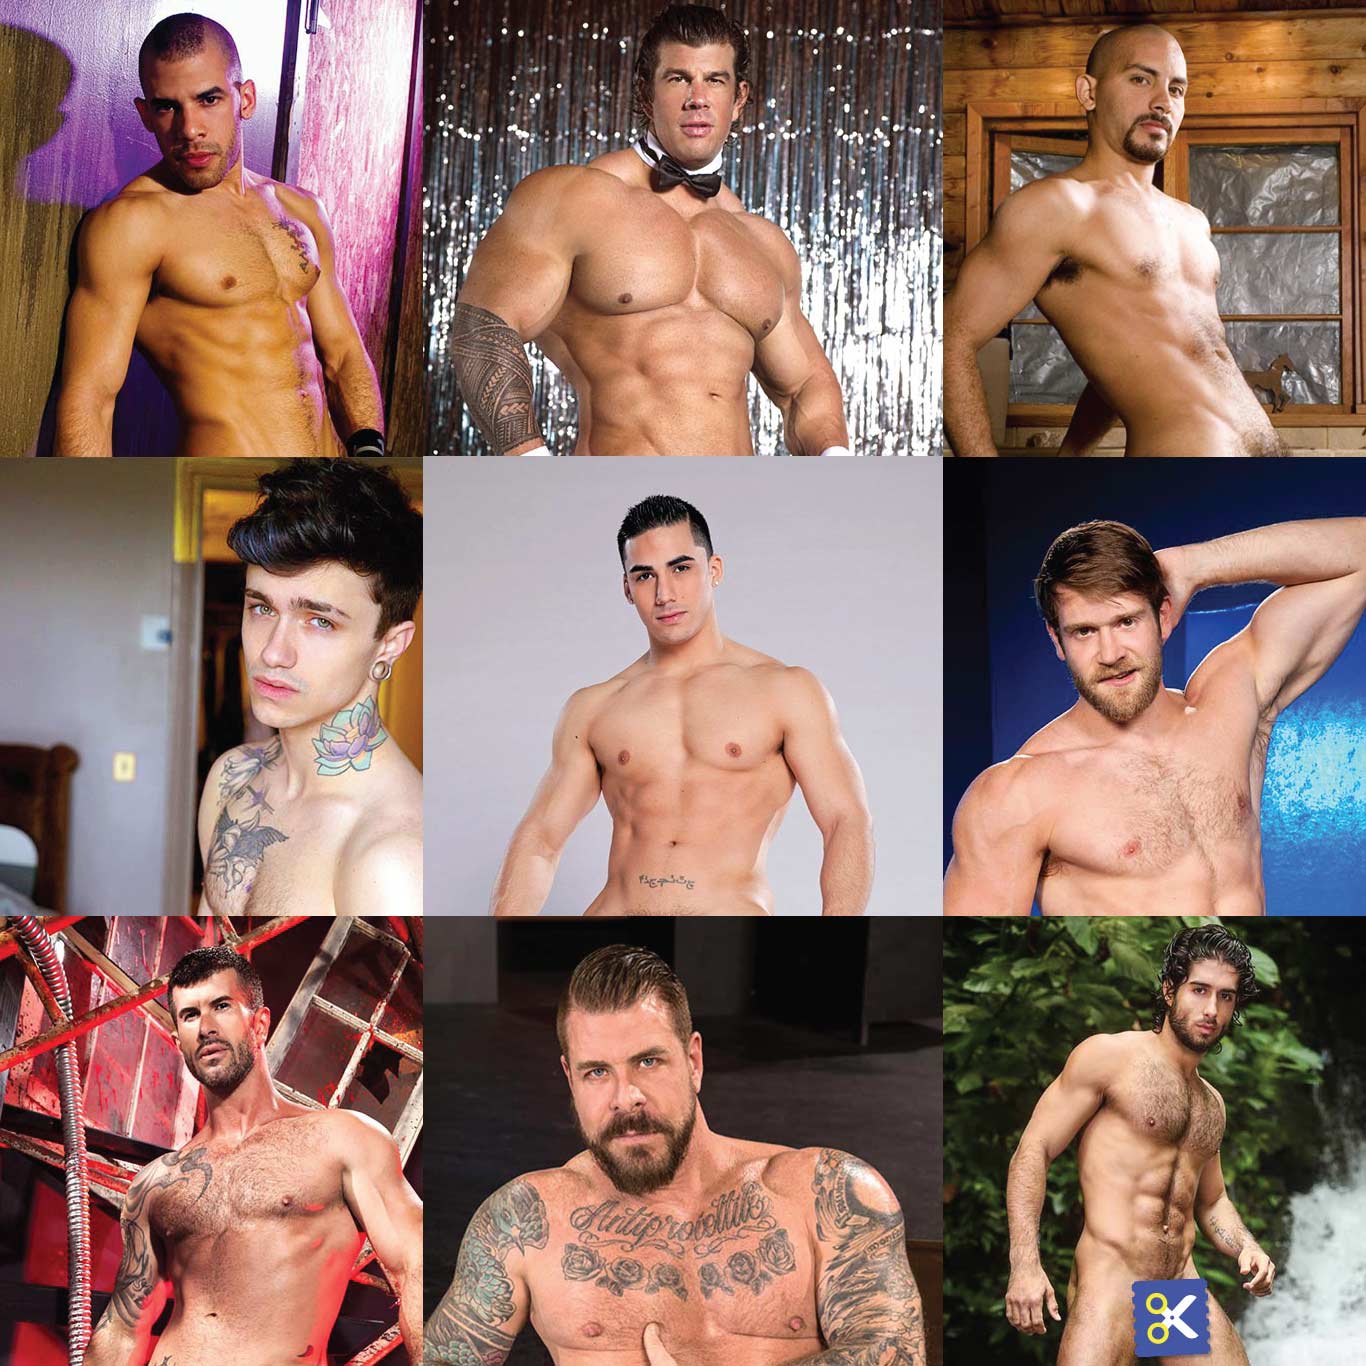 Most famous gay porn stars